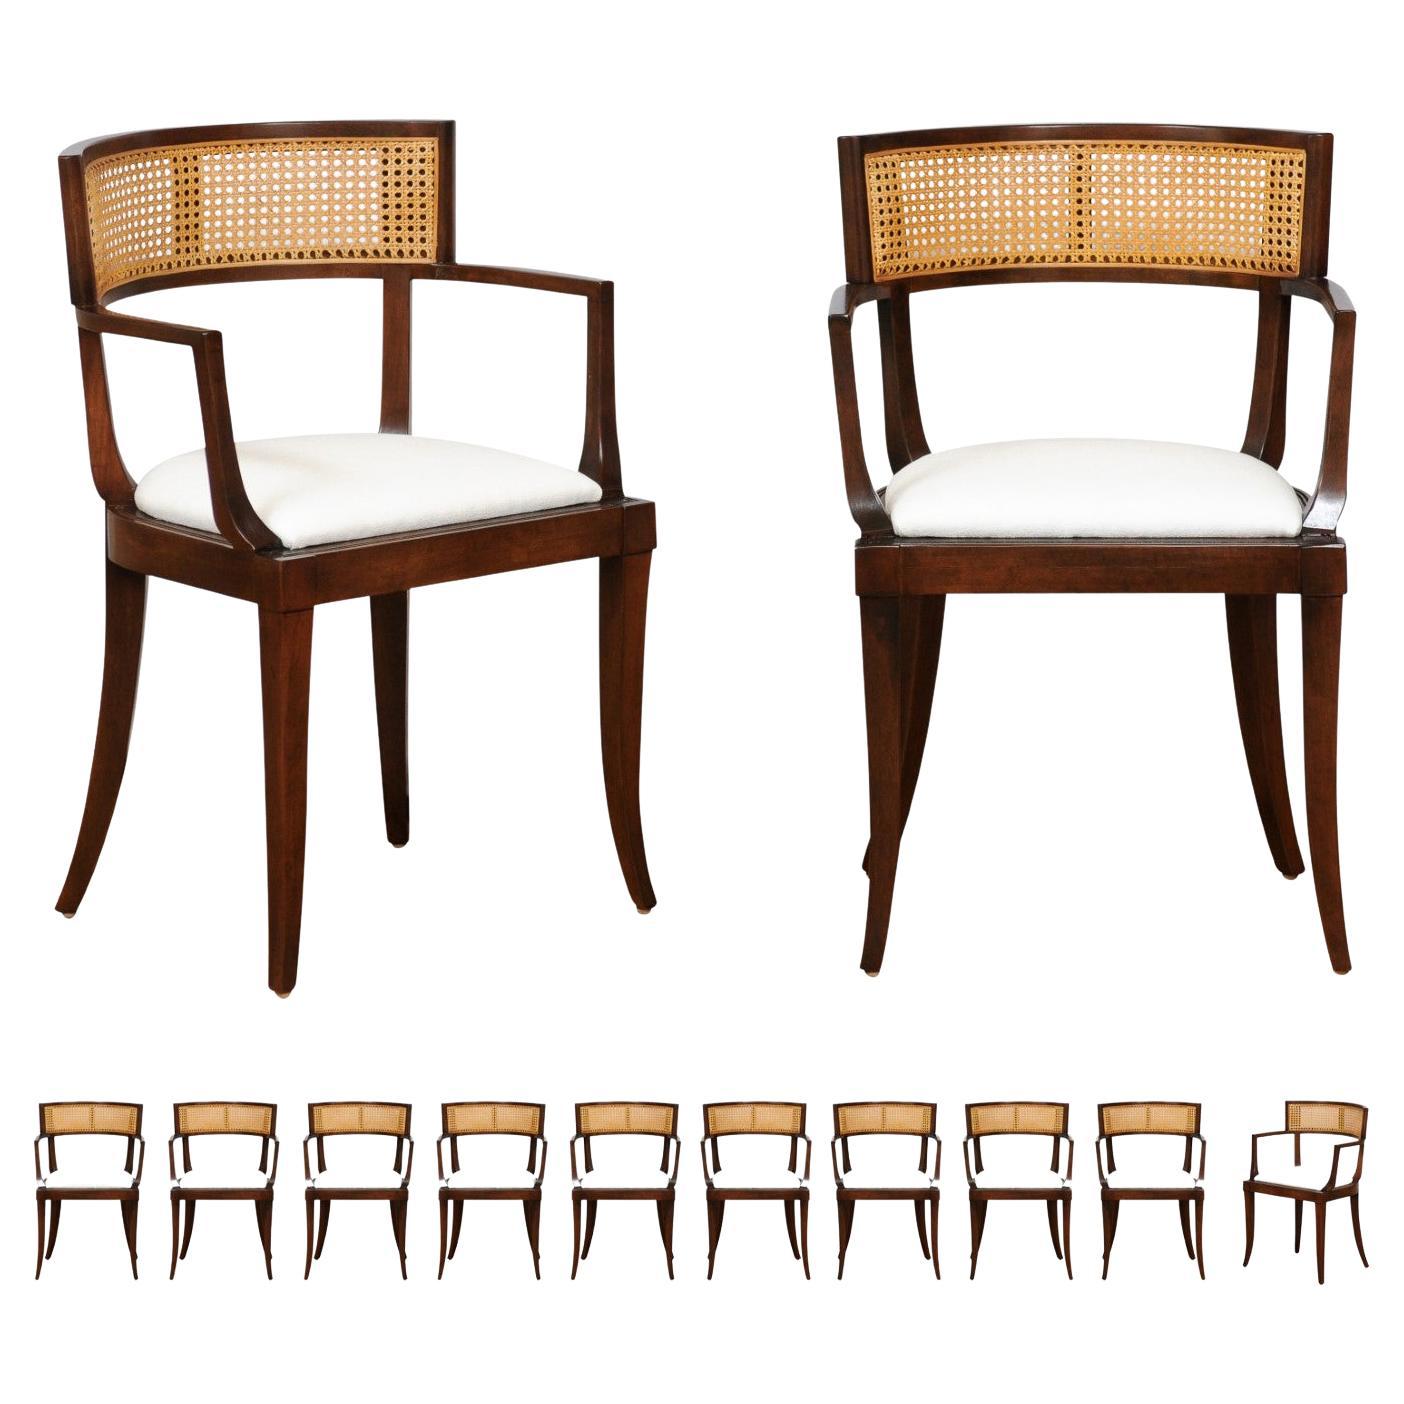 All Arm, Exquisite Set of Twelve Klismos Cane Dining Chairs by Baker, circa 1958